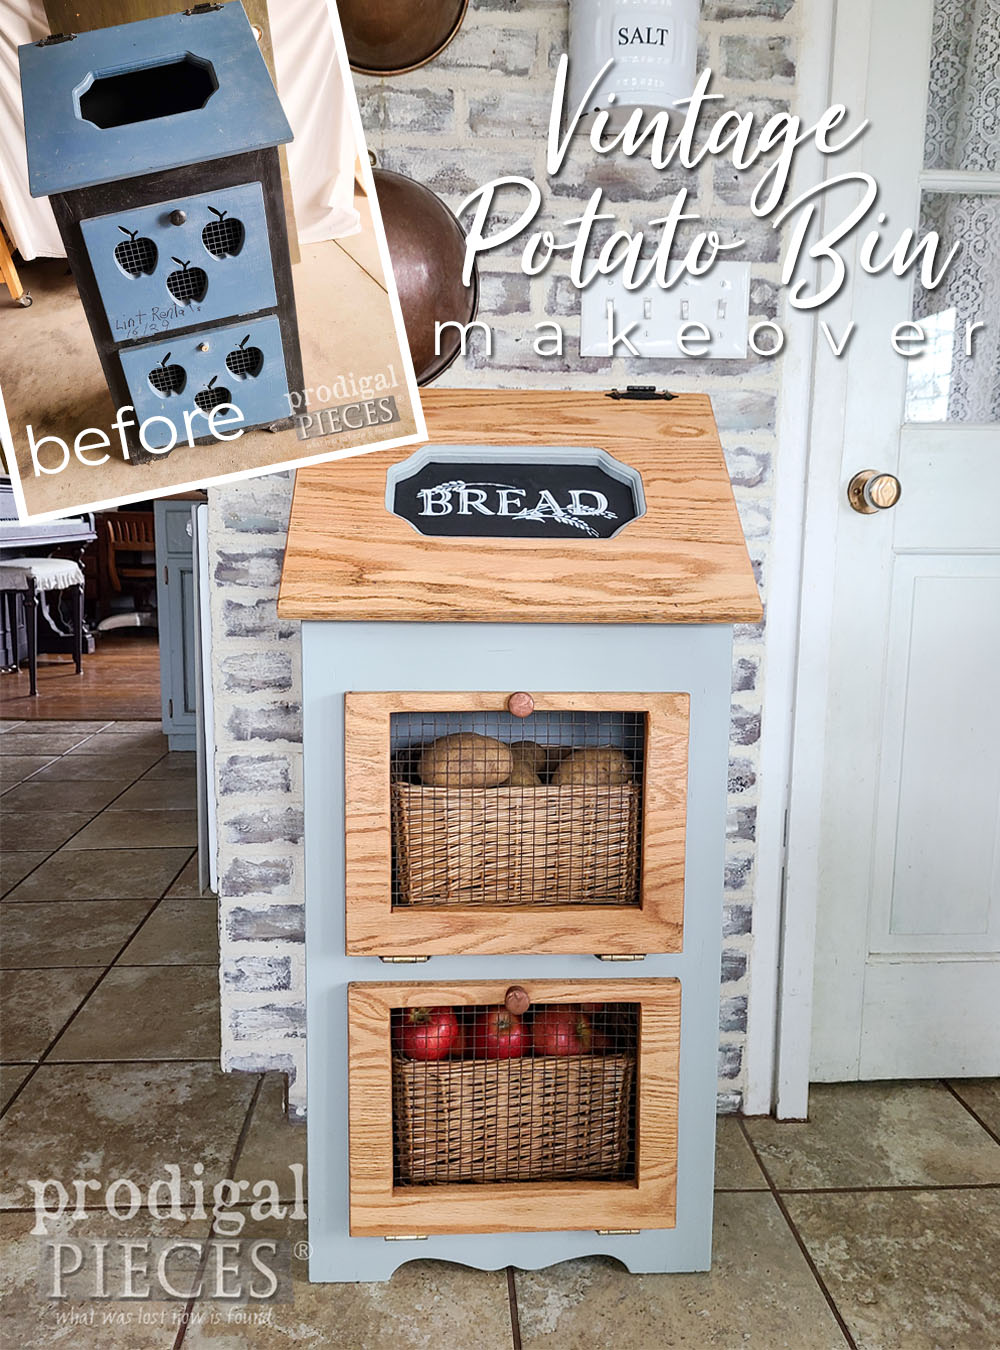 This thrifted vintage potato bin reallllly needed a makeover to update and revive it. Tutorial by Larissa of Prodigal Pieces | prodigalpieces.com #prodigalpieces